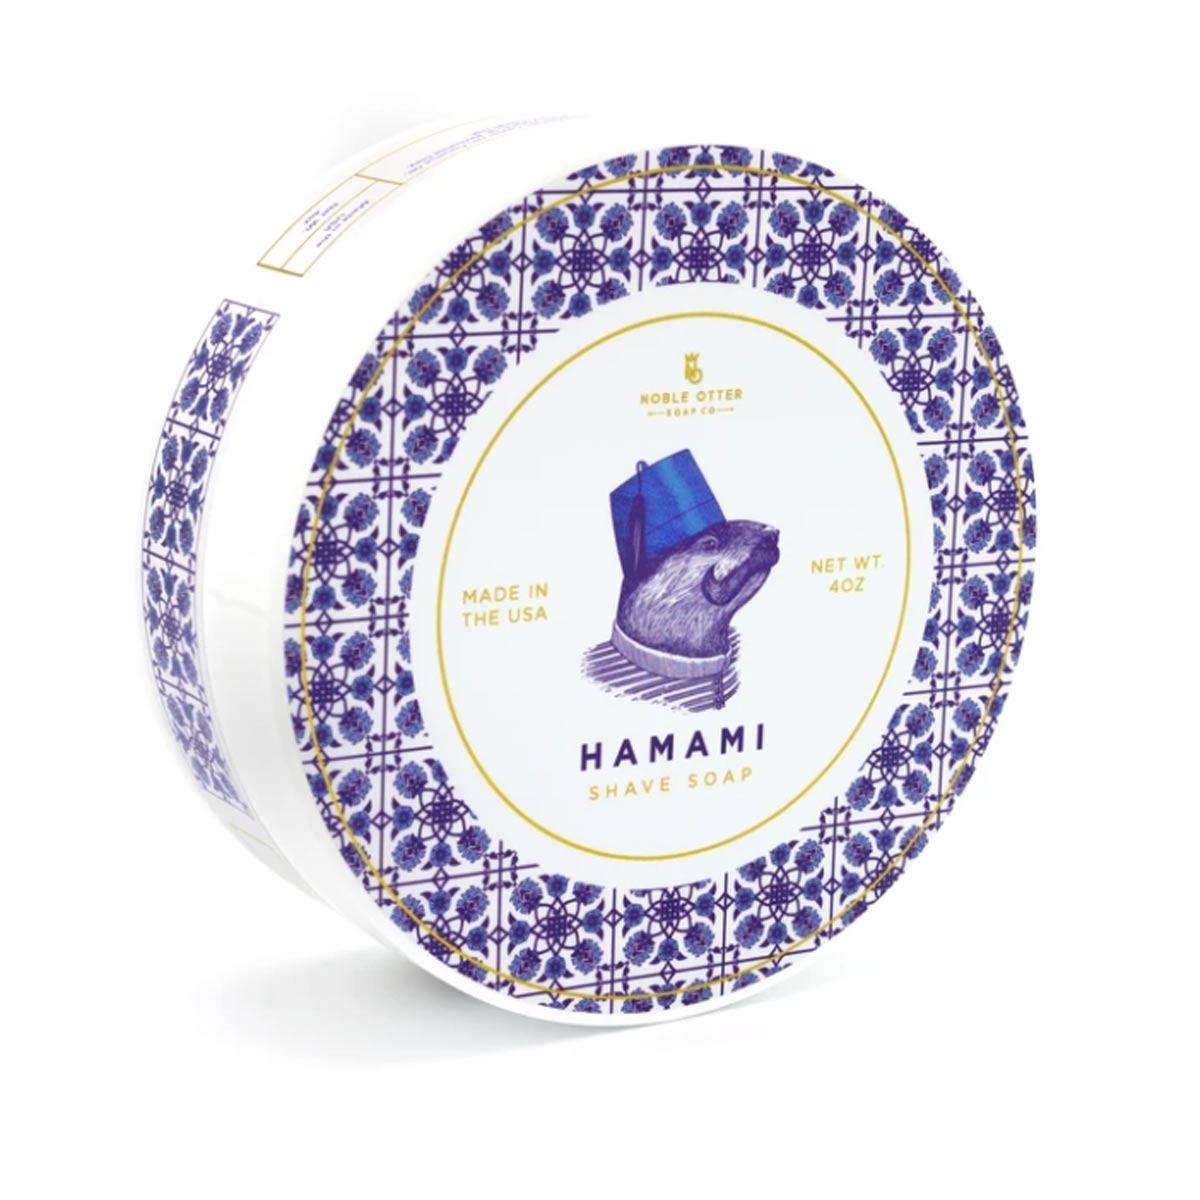 Primary image of Shave Soap Hamami